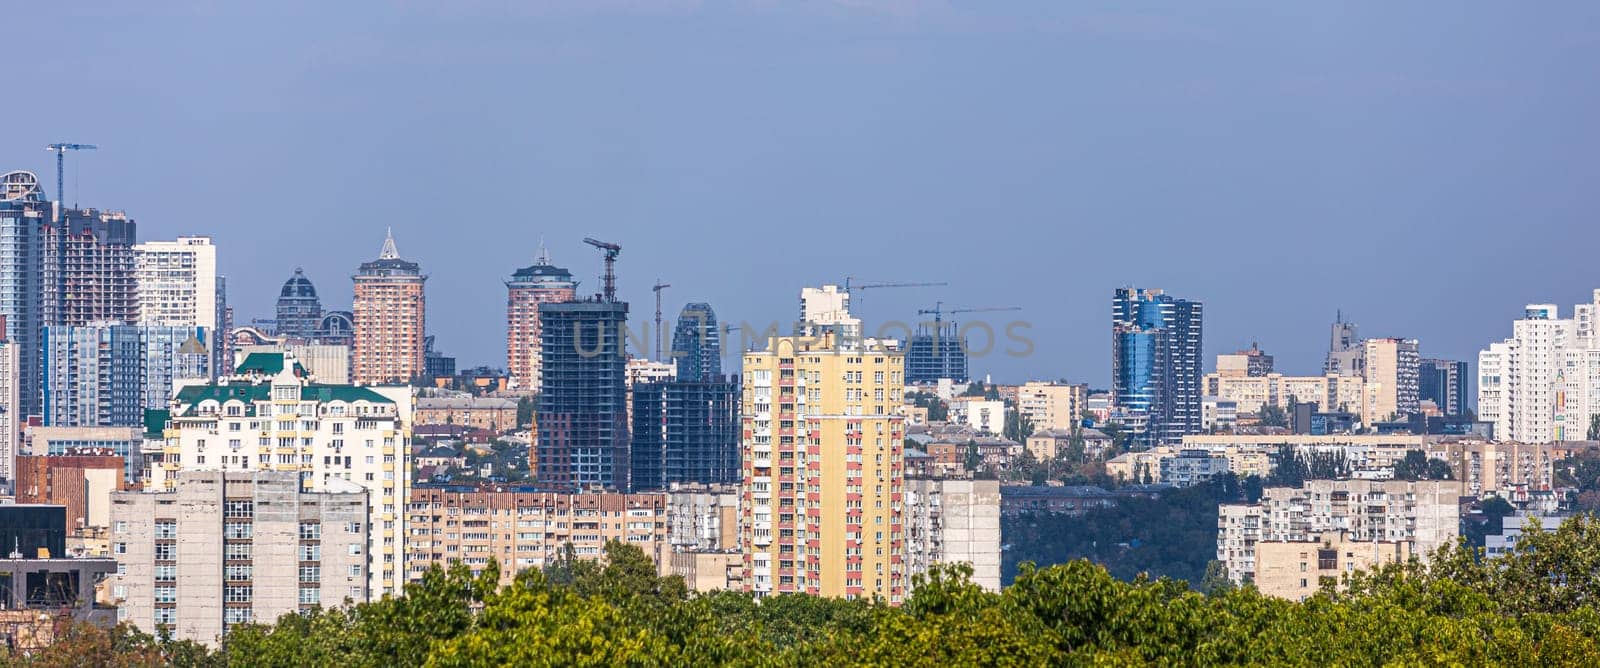 Aerial photography of residential areas of Kyiv with a view of the railway station and new skyscrapers under construction, aerial view, city photography. Copy space by sarymsakov